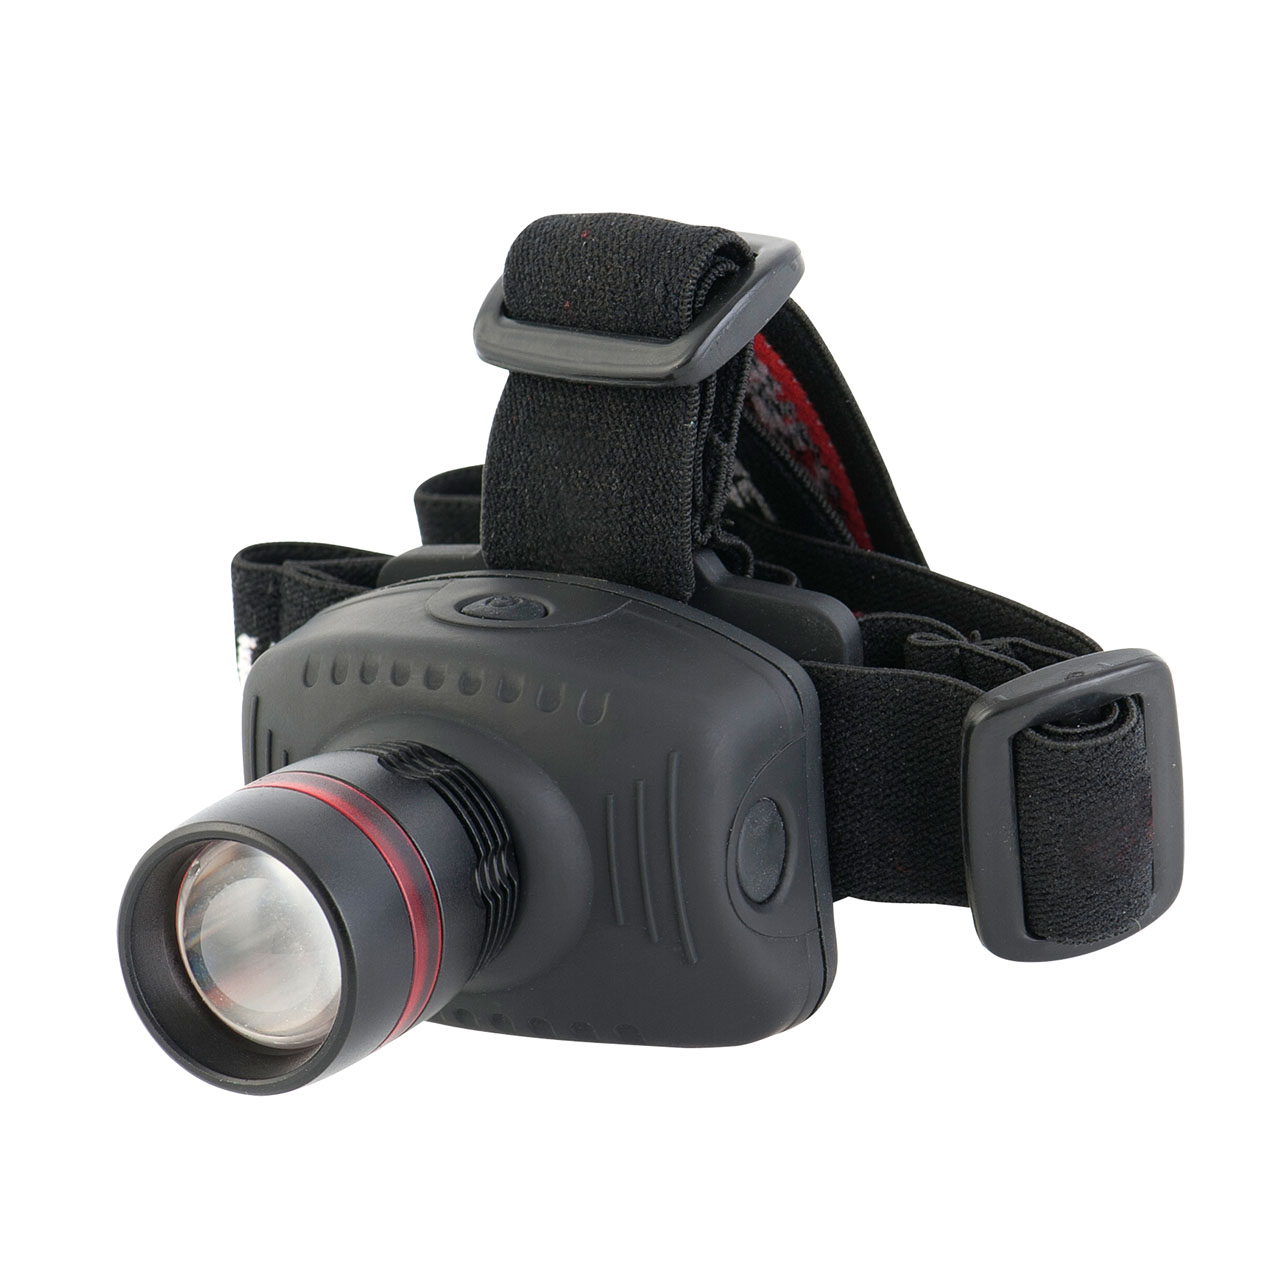 Head Torch 3 W Cree Alliage Tête Torche Phare avec zoom SUPERLED ™ 